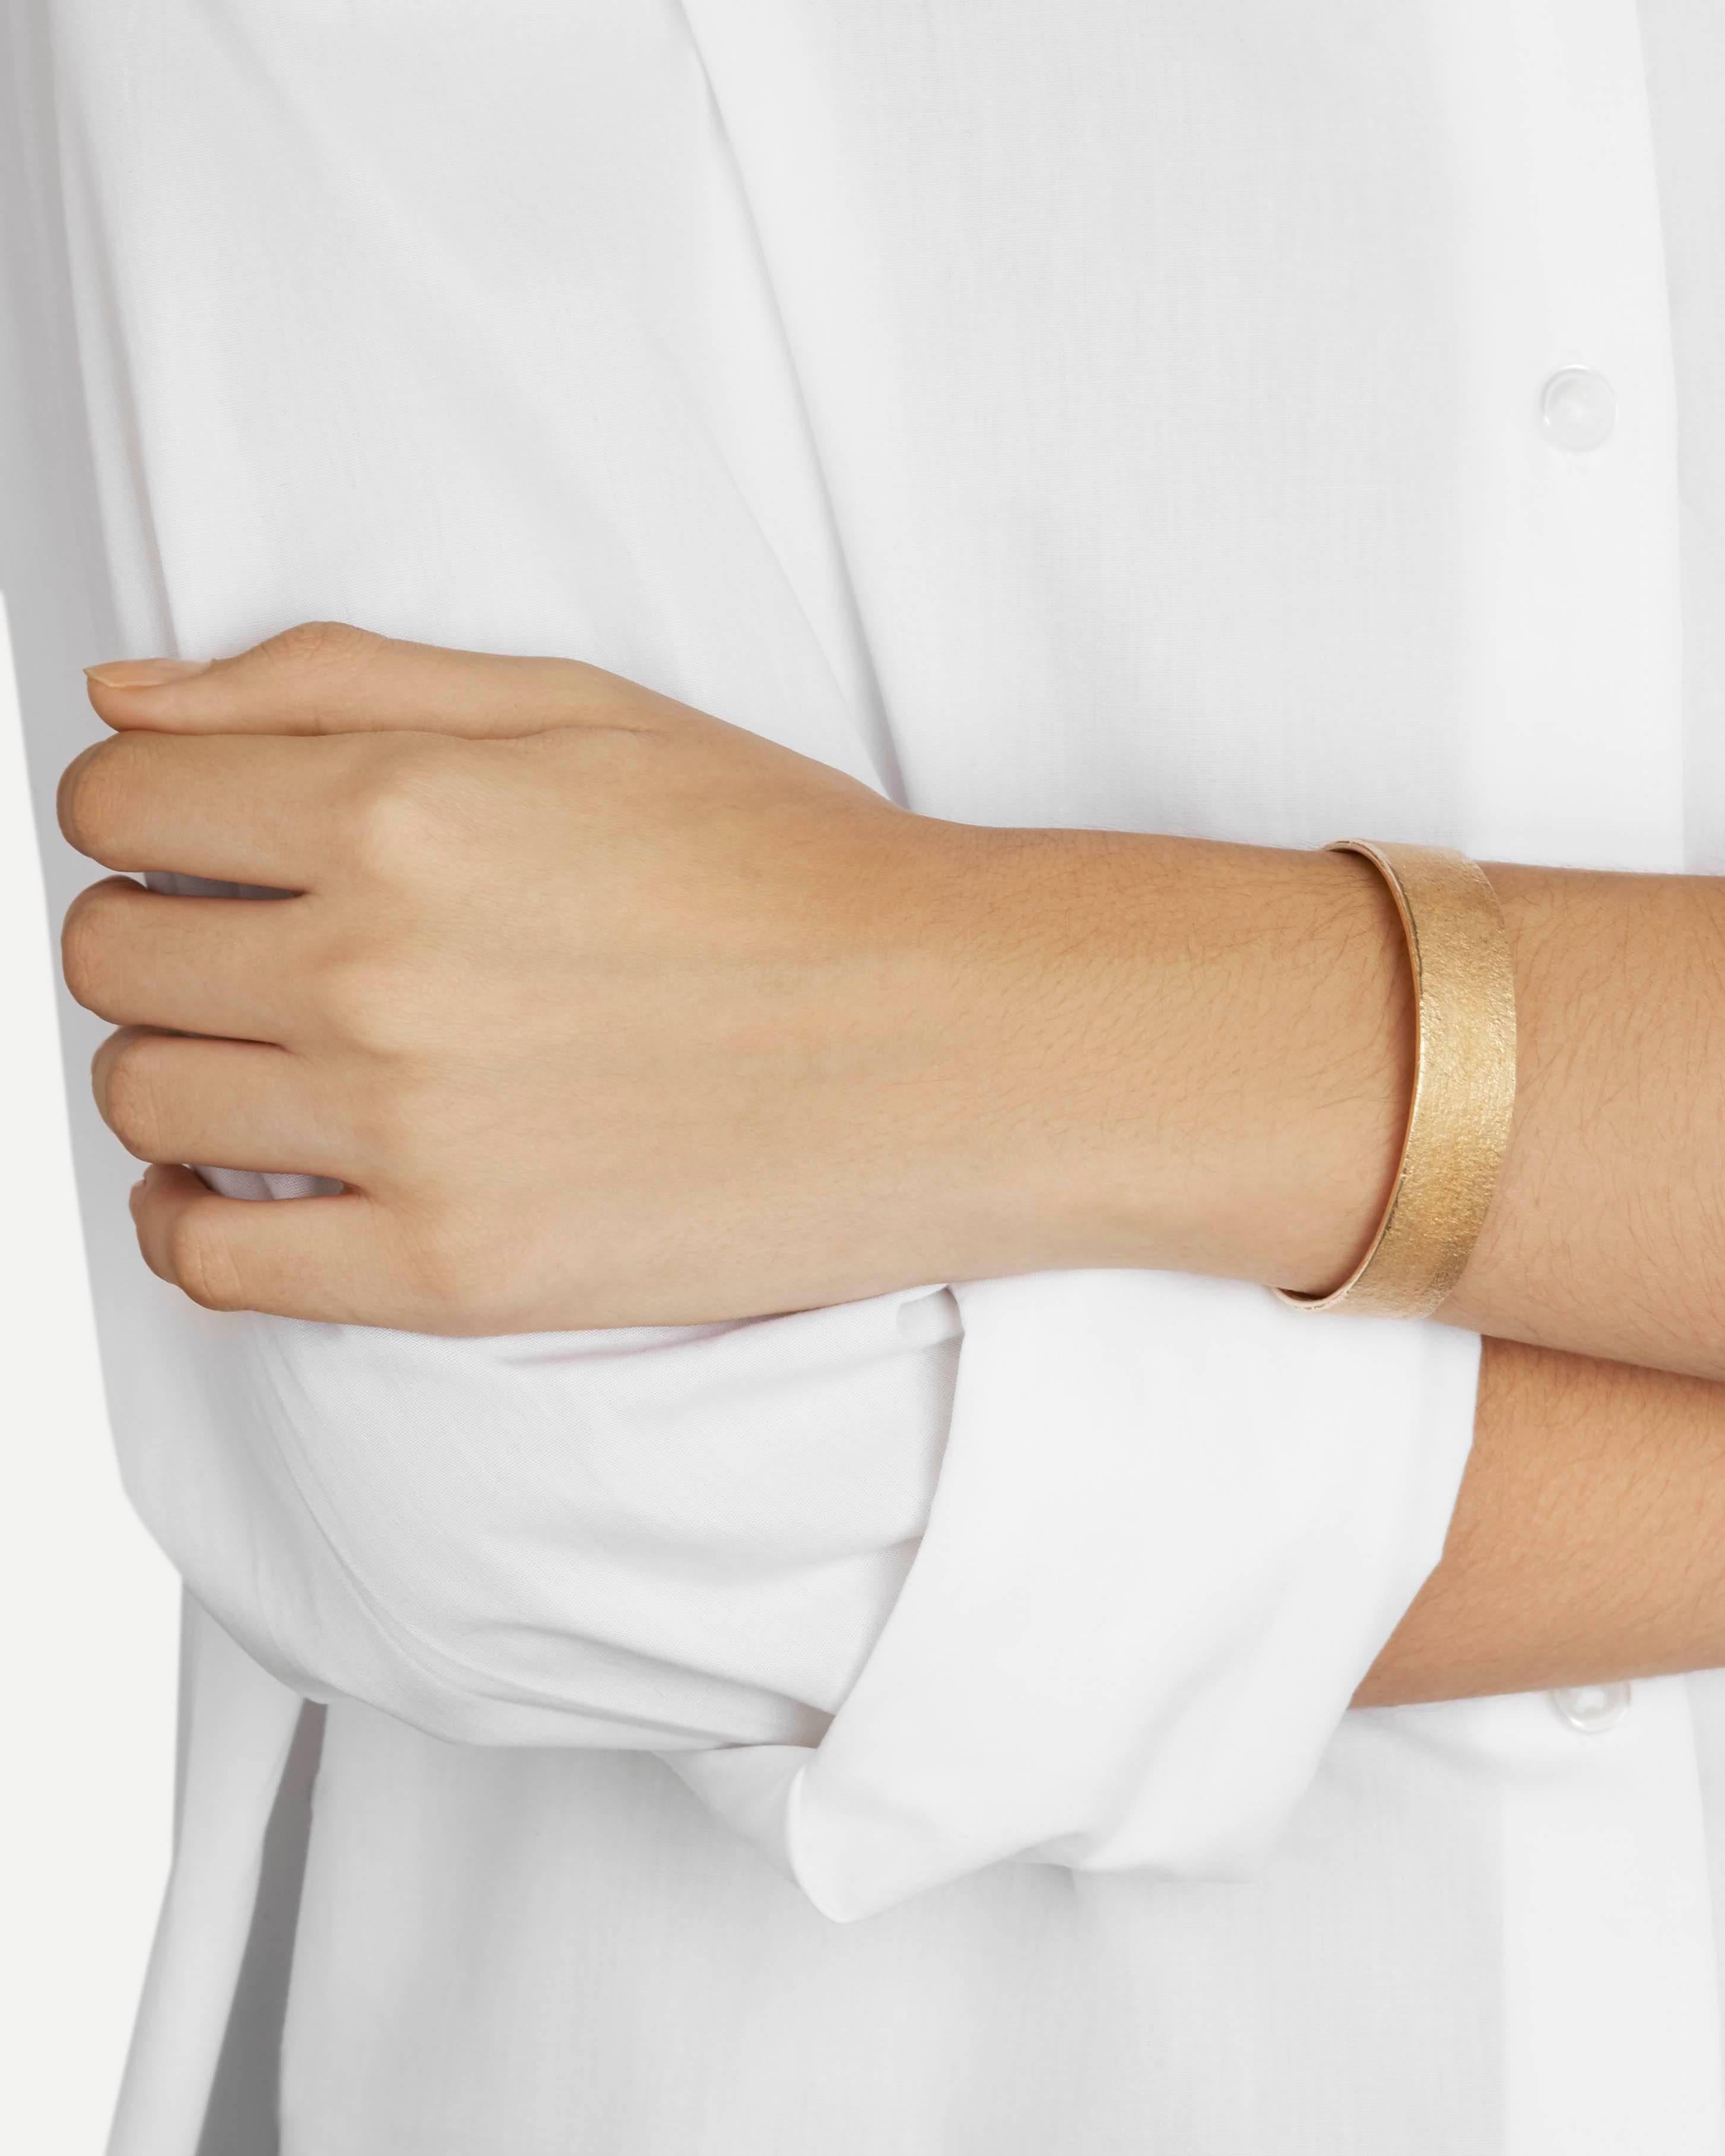 This clean-lined cuff bracelet features a rustic texture in warm, glowing solid bronze.  

Every piece in this collection is individually hand-crafted in paper and cast directly into precious metal in a unique and innovative process.  Every piece